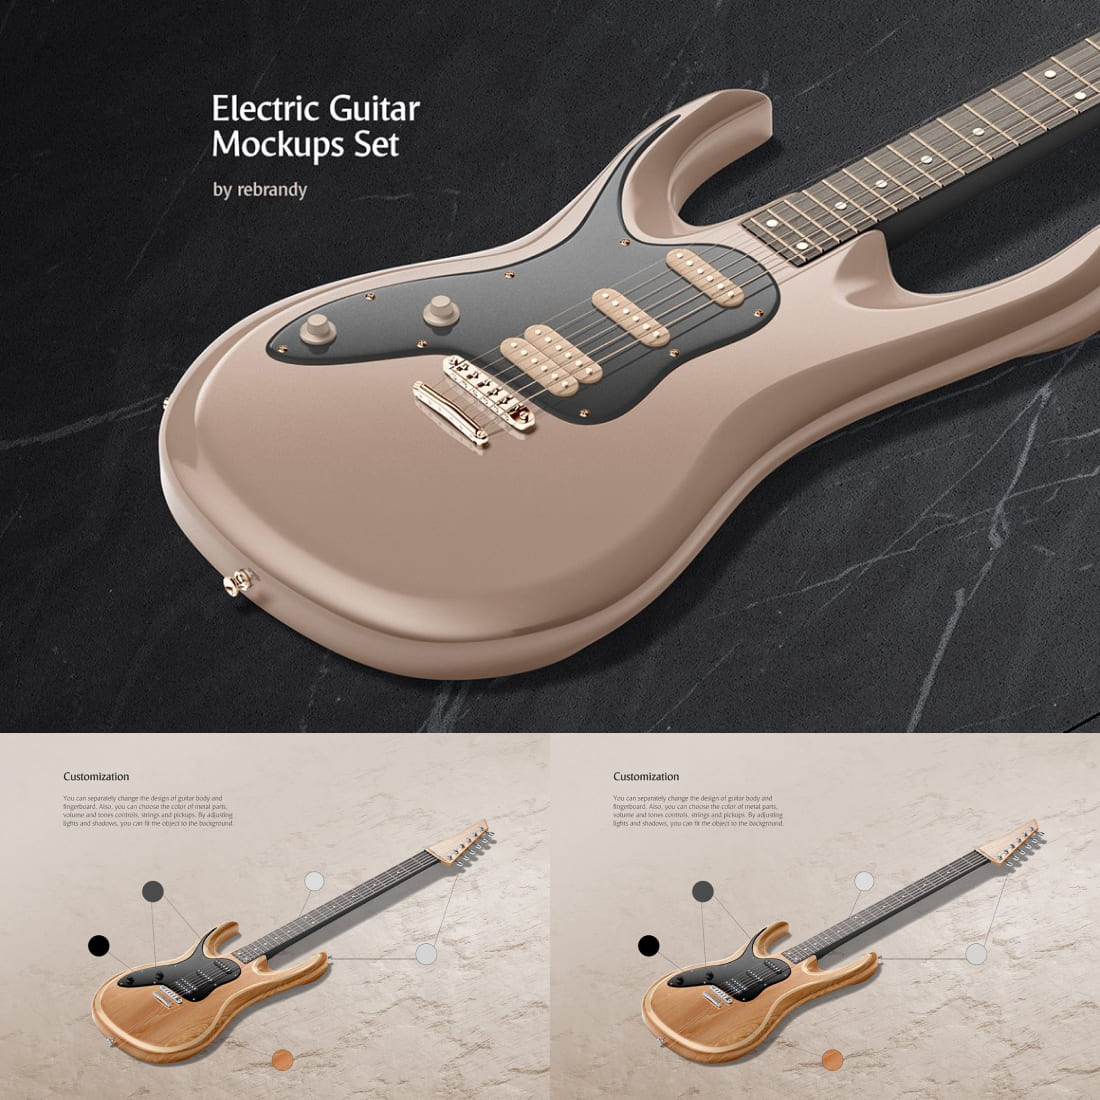 You can choose the color of the materials from which the electric guitar is made.